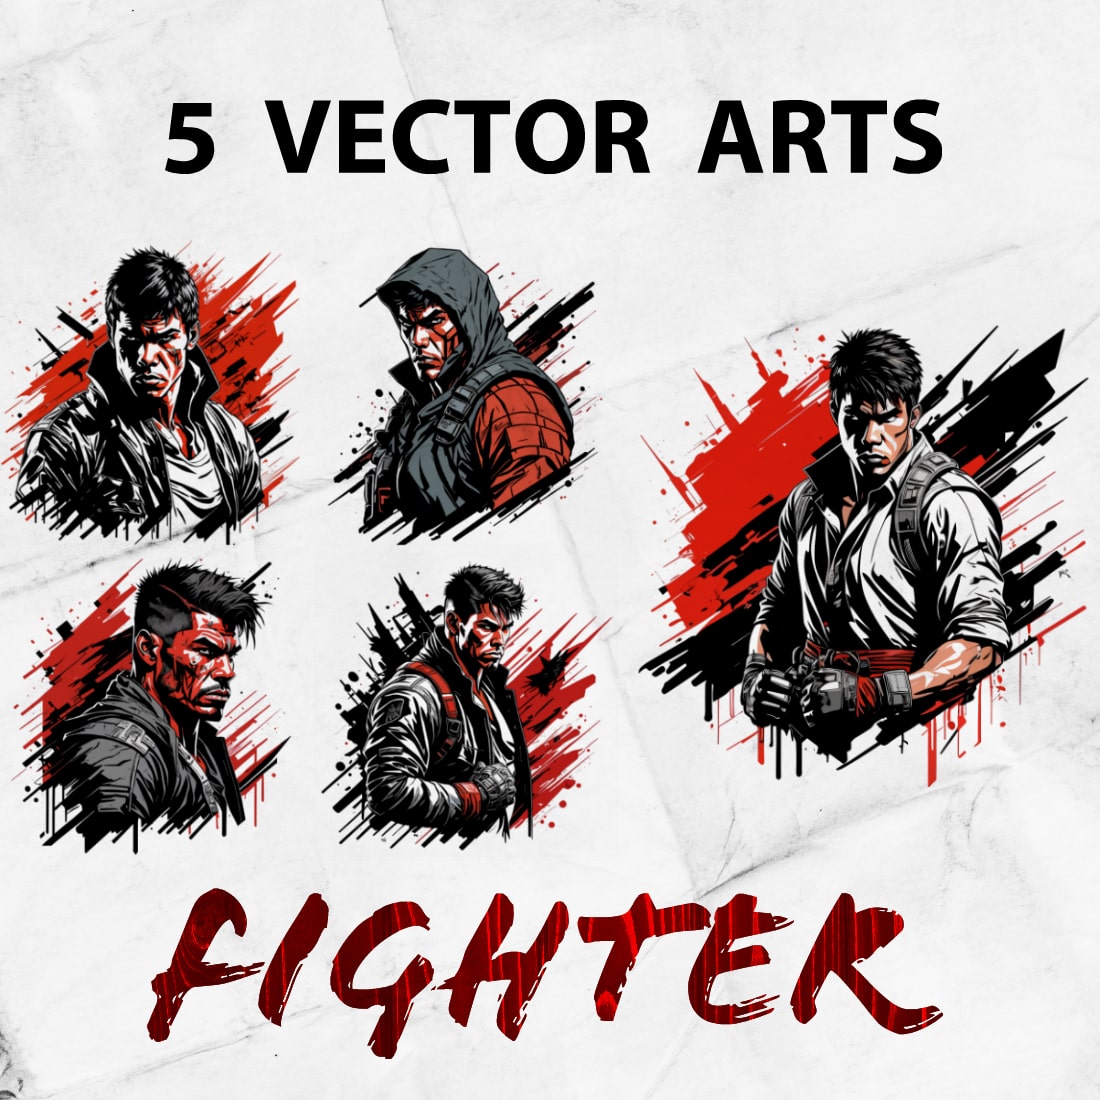 Fighter Vector Illustrations cover image.